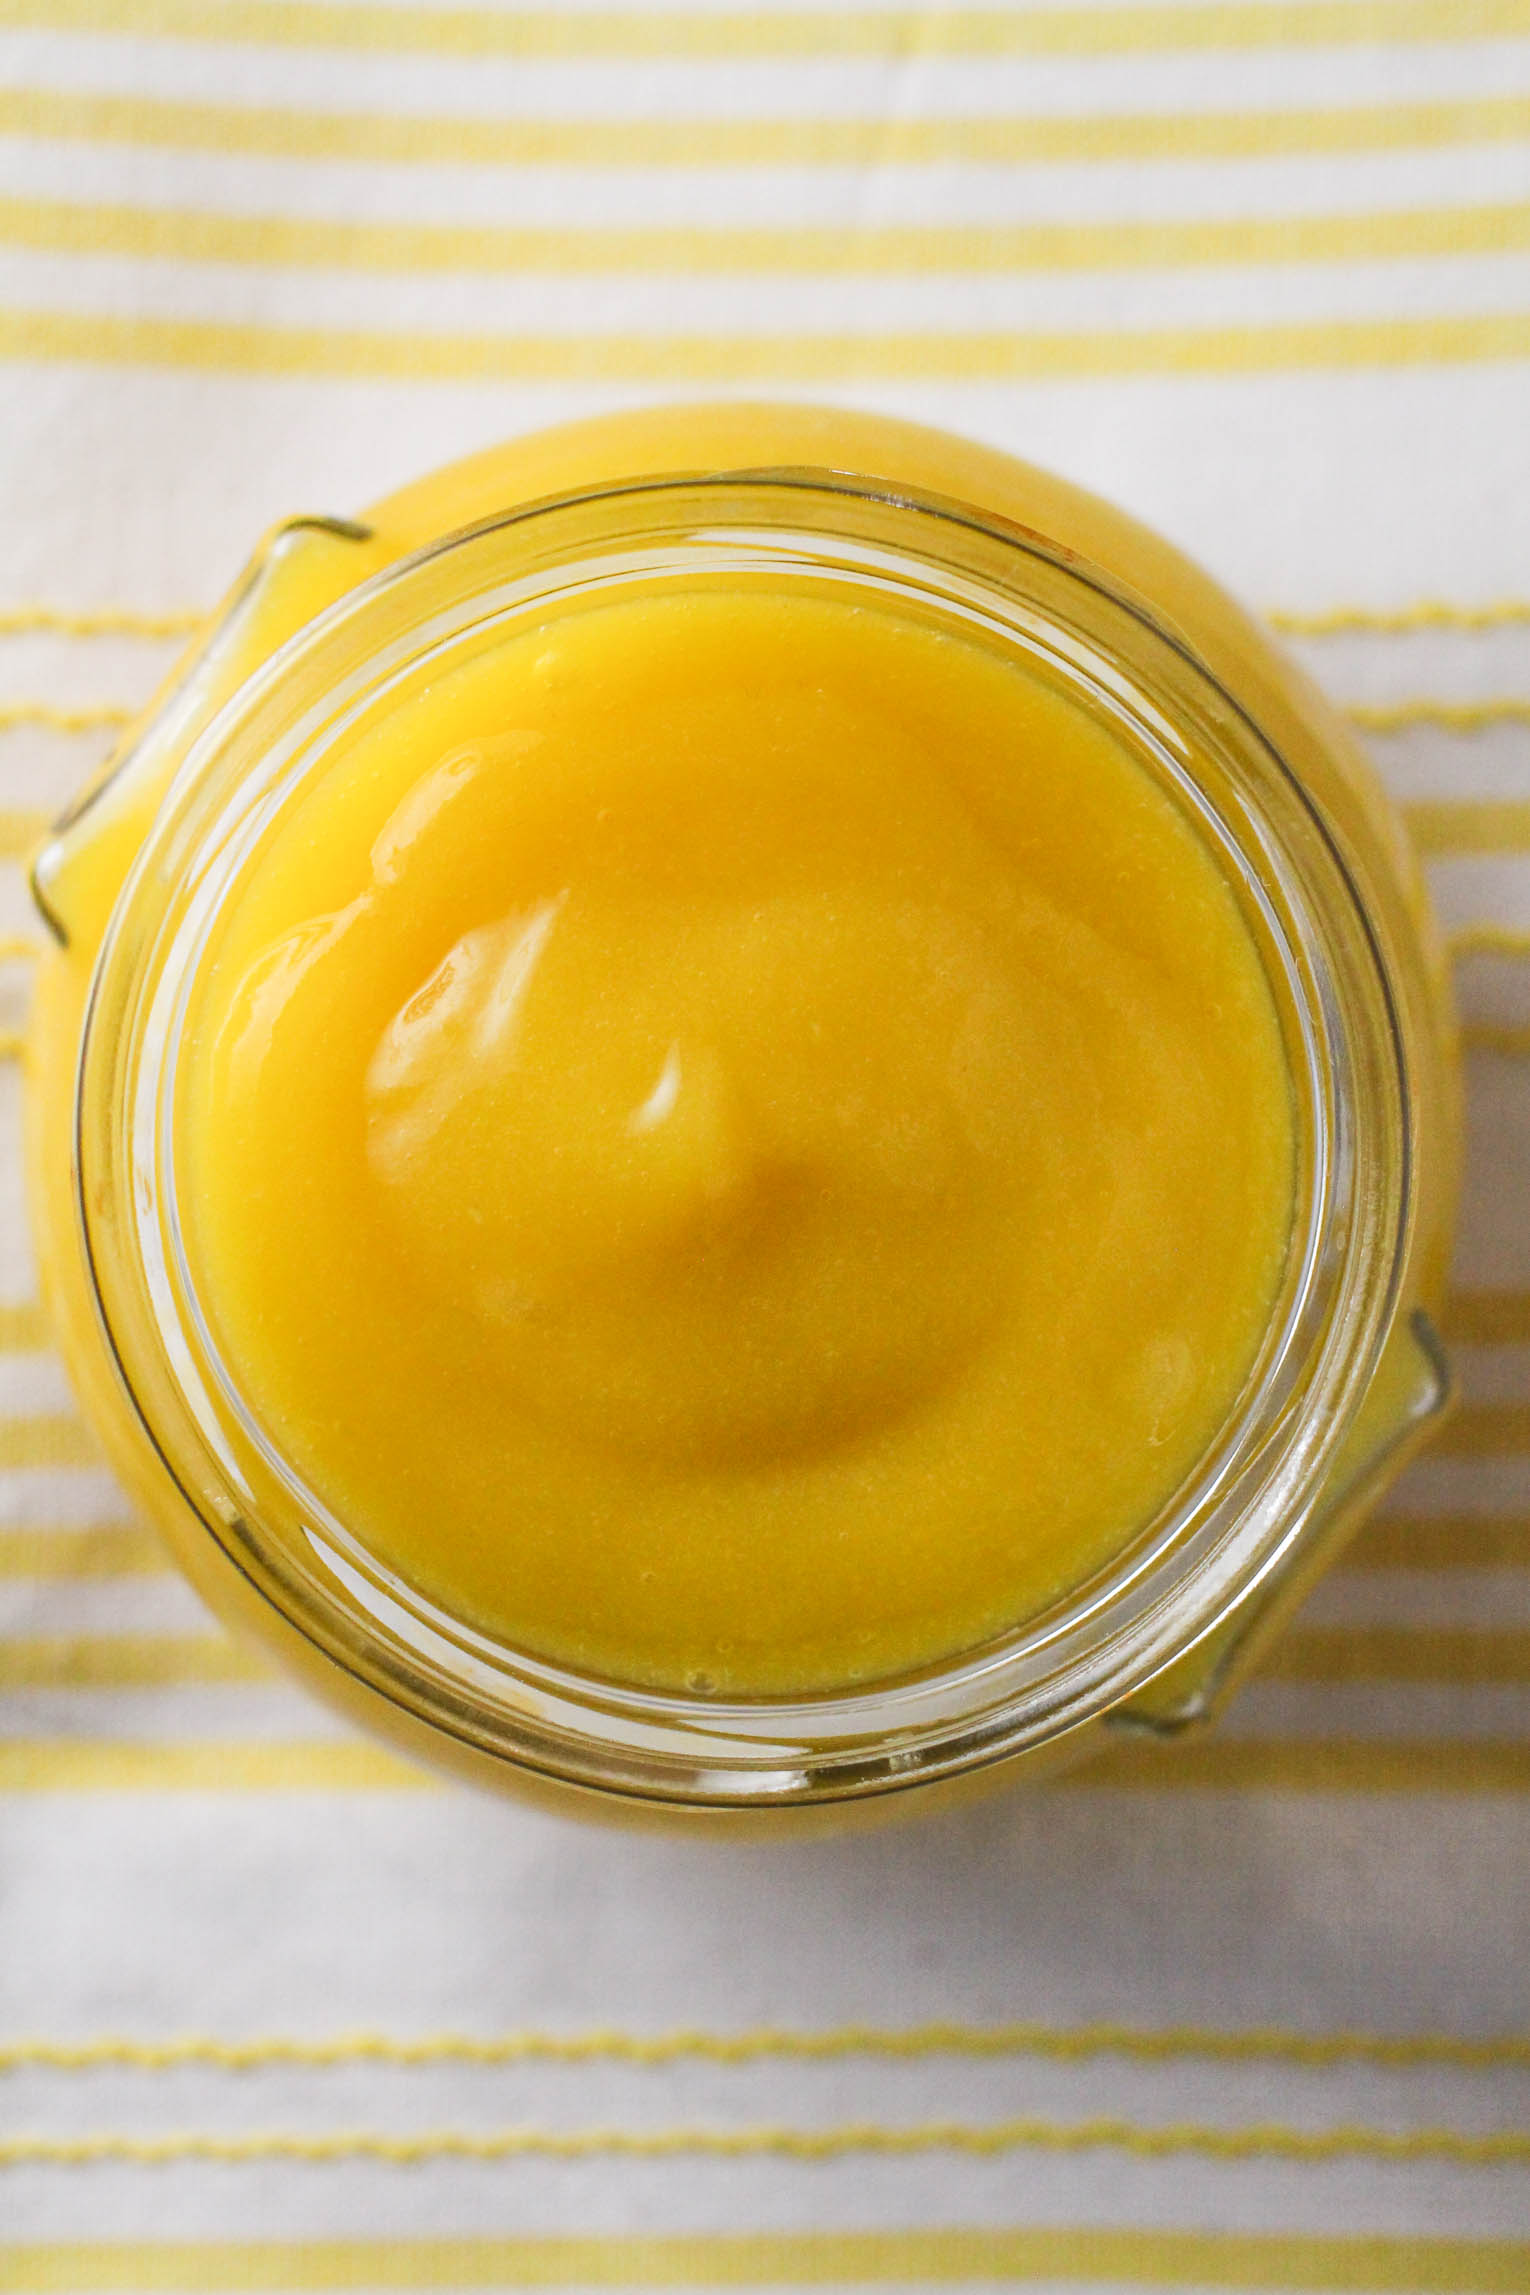 Top view of the mango puree in a glass jar standing on a kitchen towel.